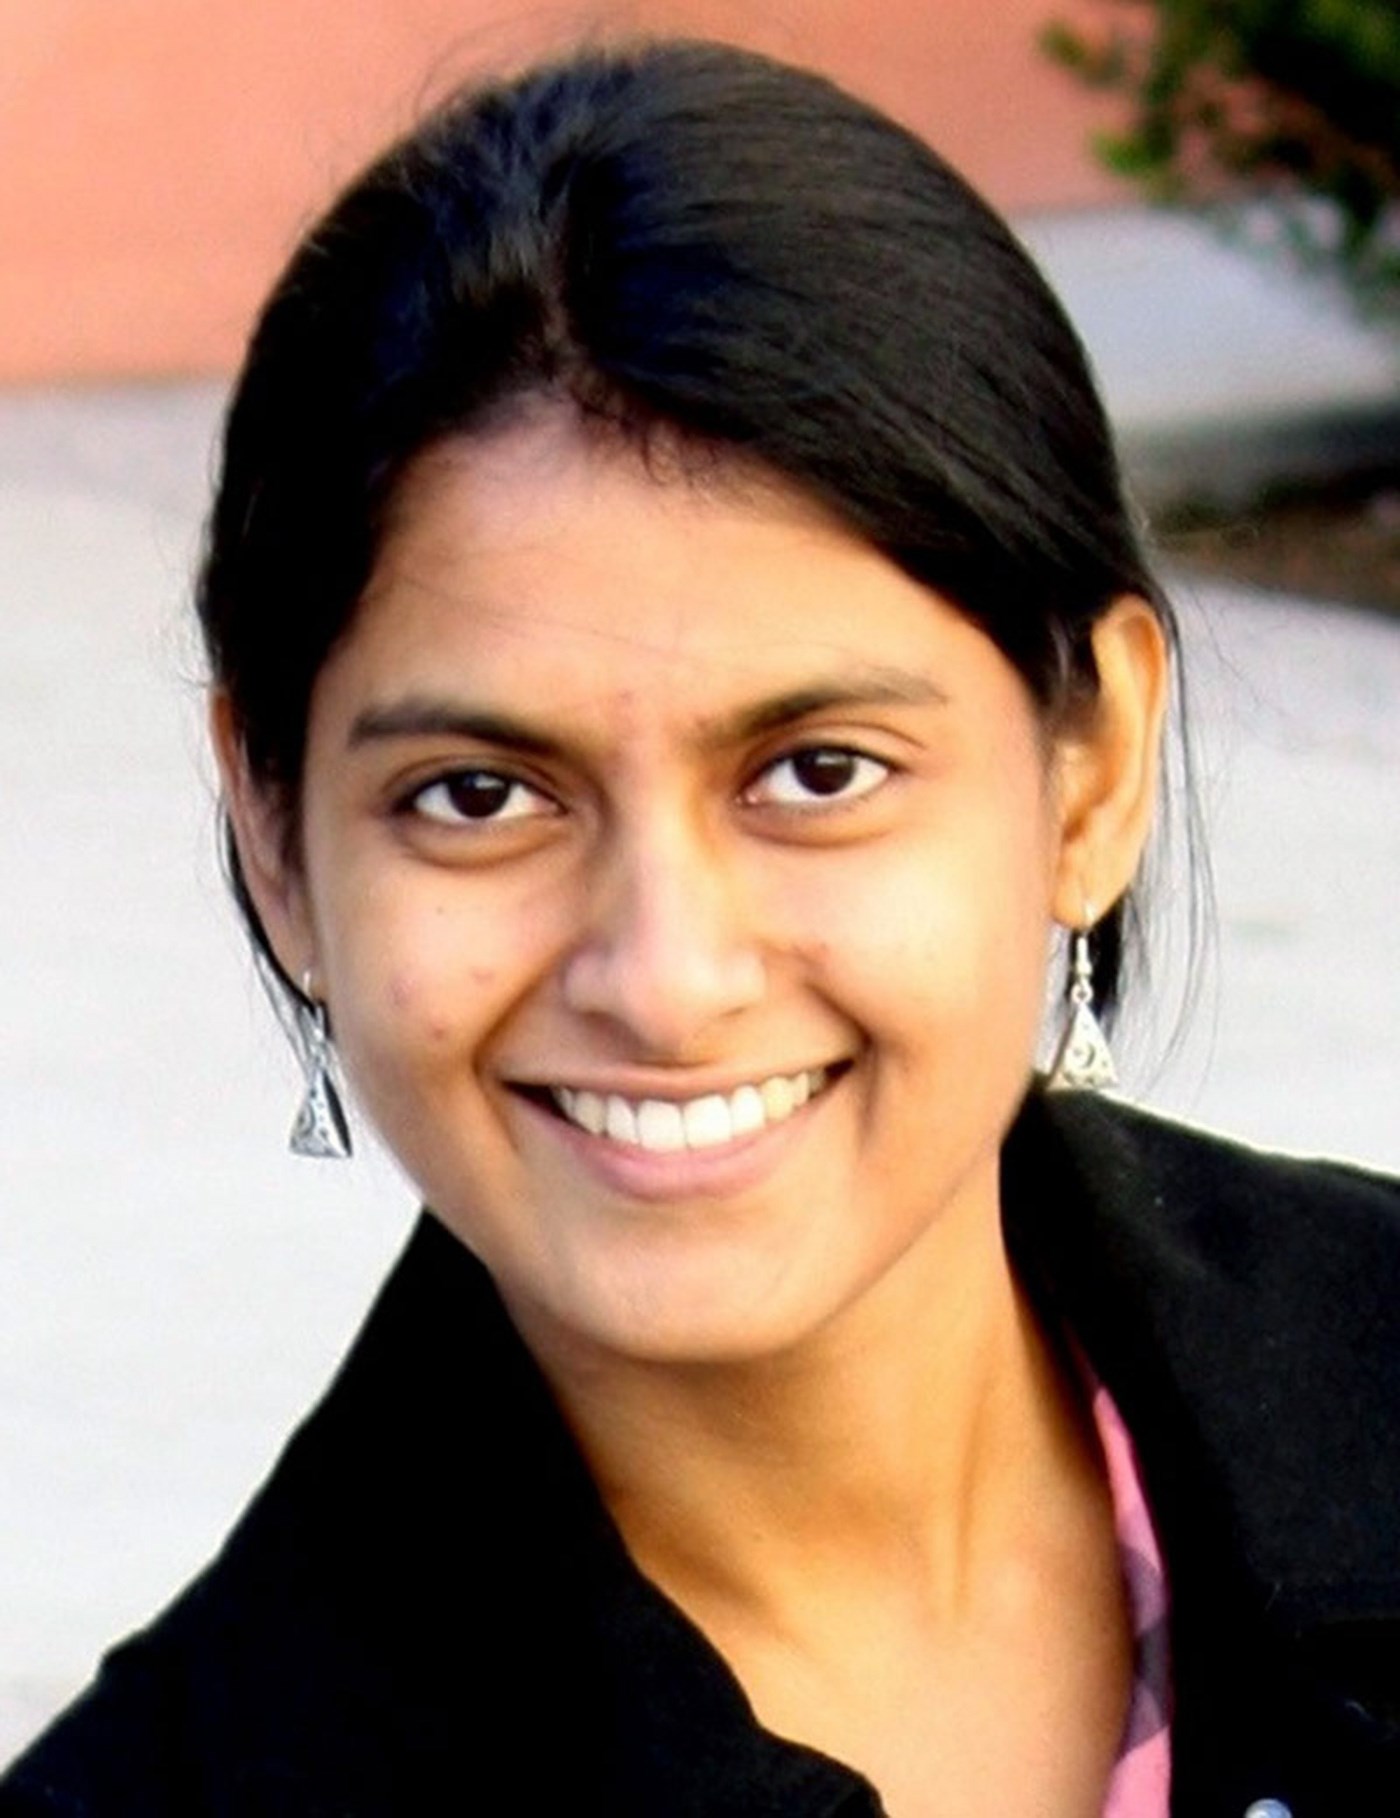 Joyita Dutta is an Assistant Professor in the ECE department in the Francis College of Engineering at UMass Lowell.